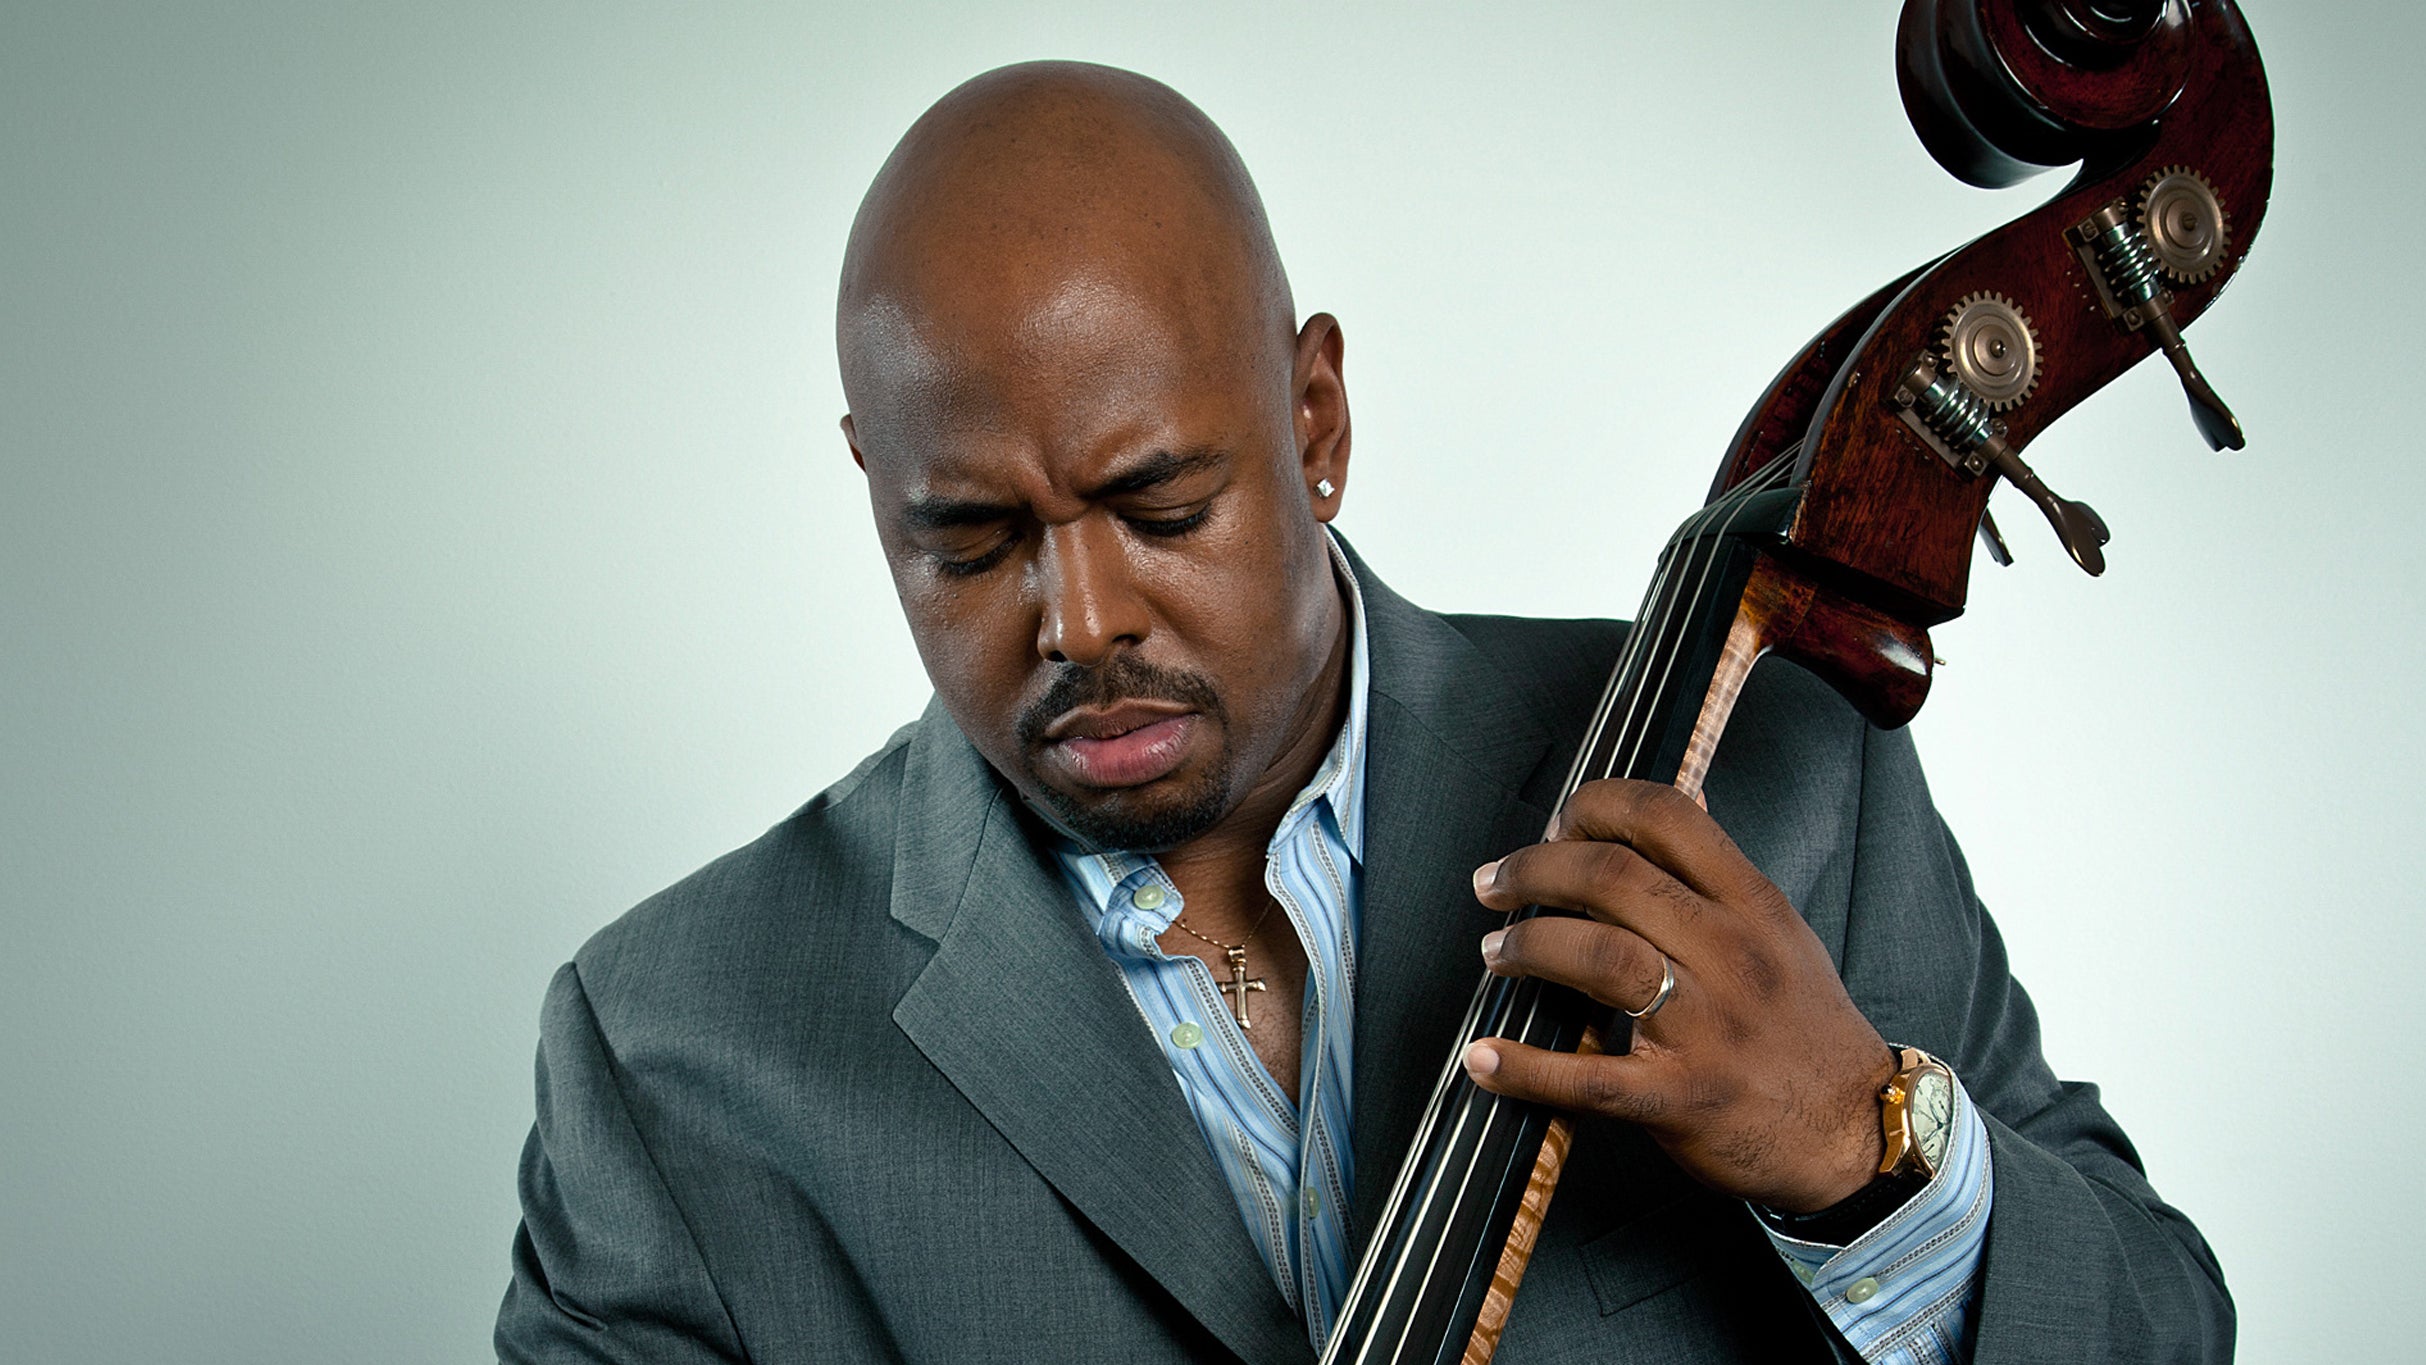 Christian McBride Big Band with special guests in Newark promo photo for Member presale offer code